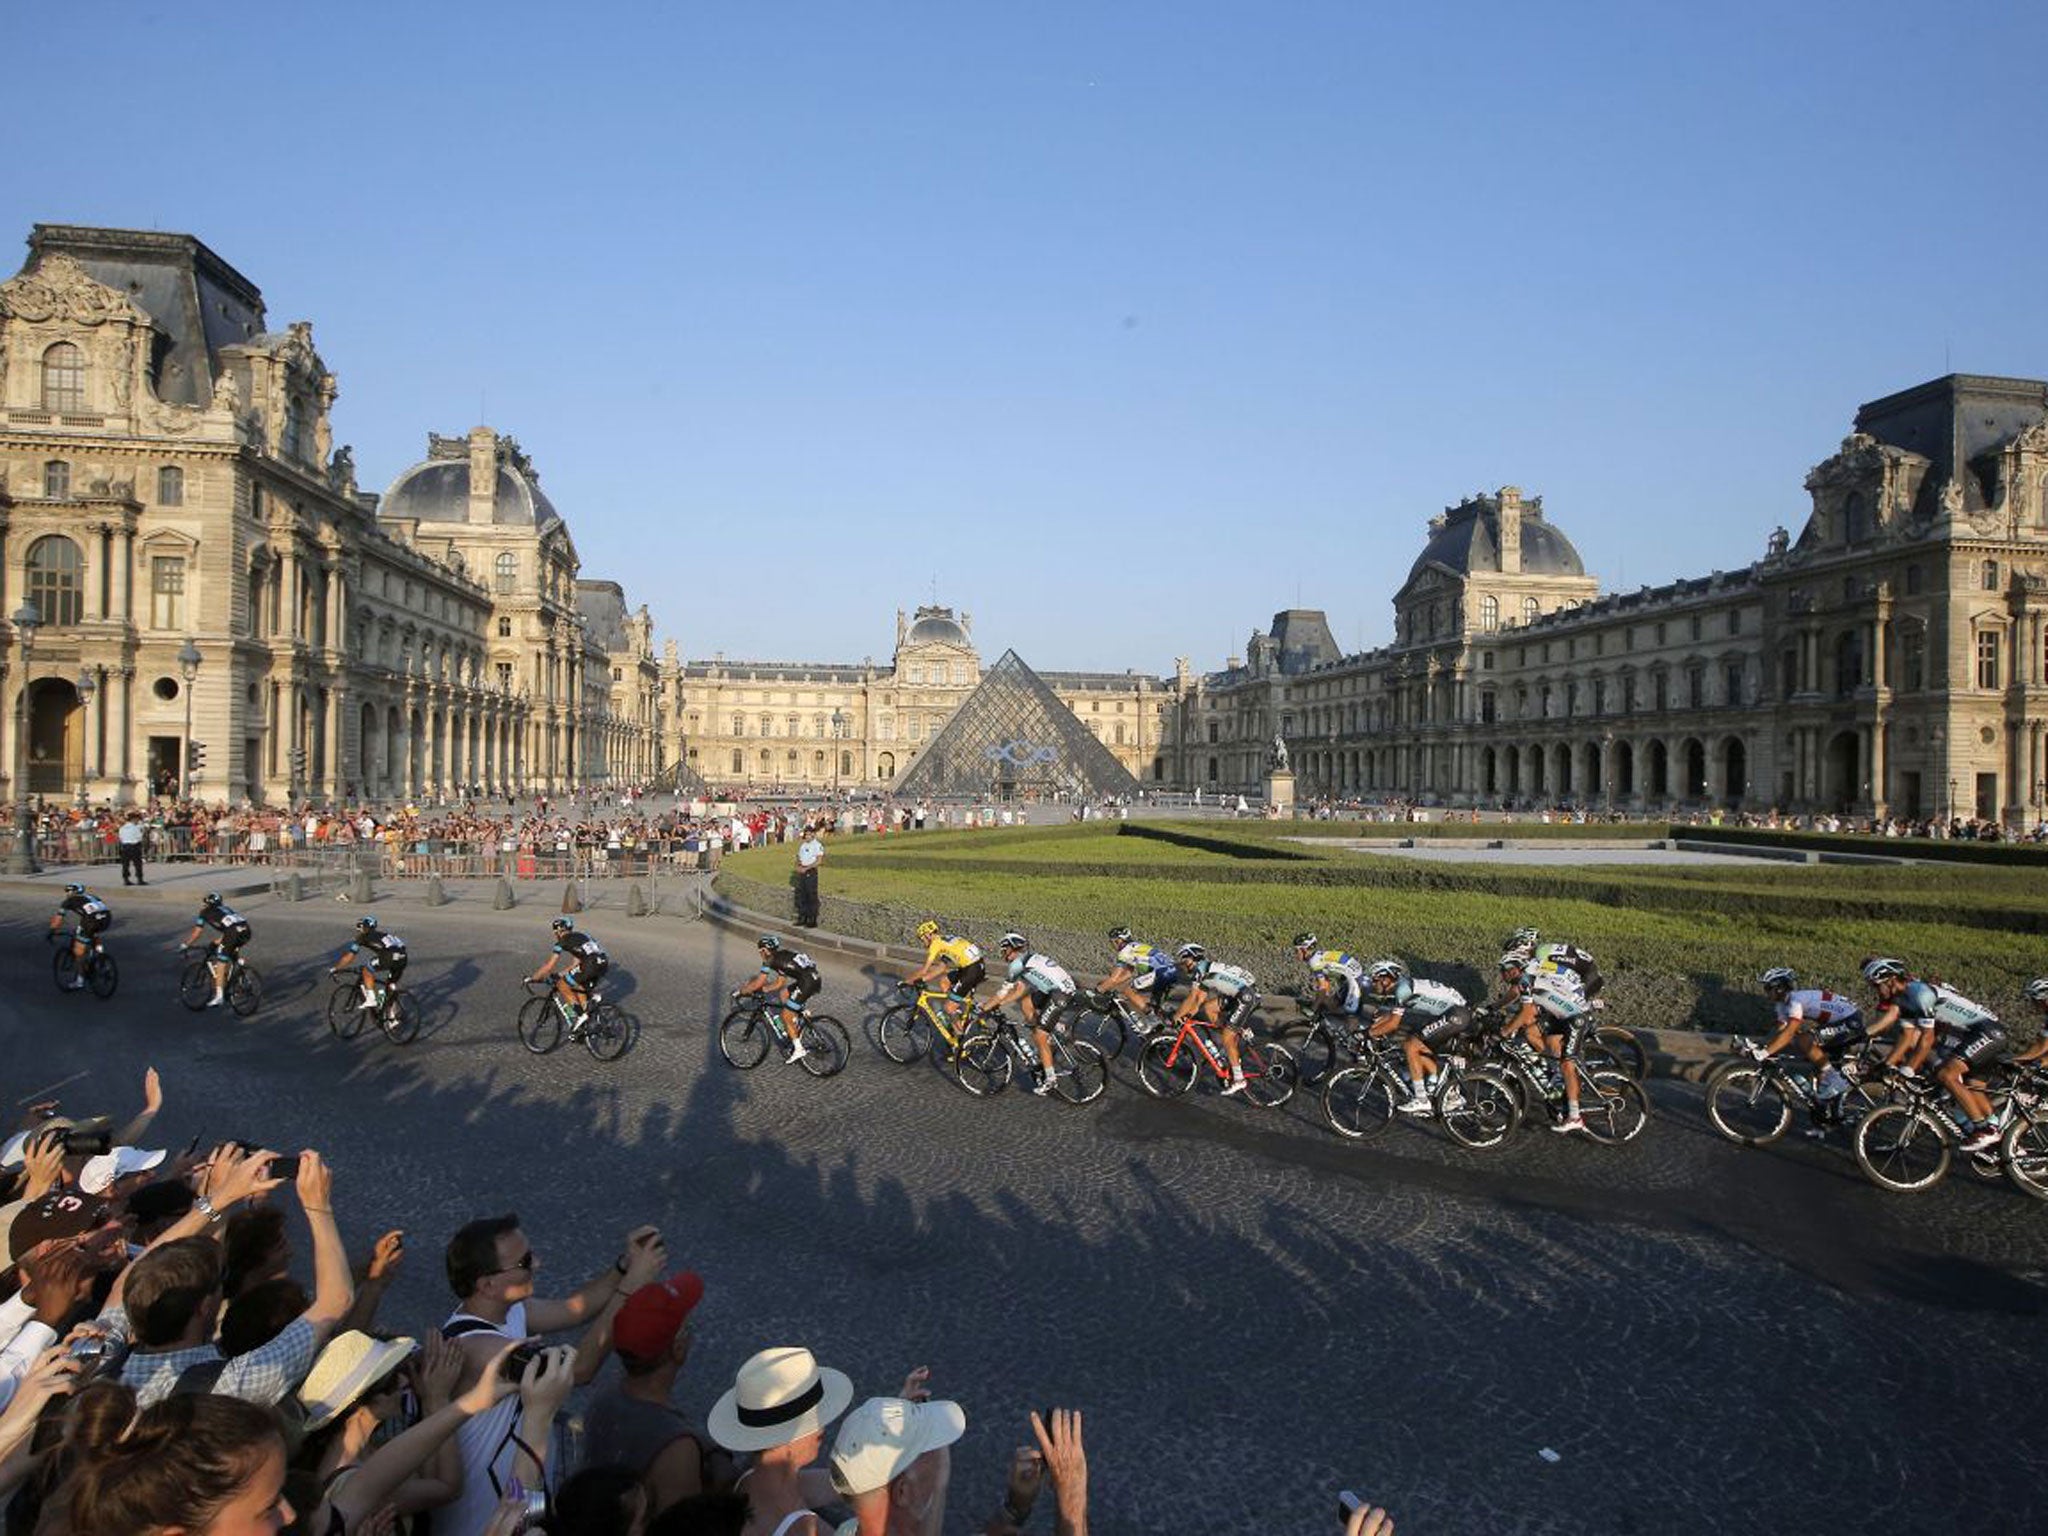 The peloton rides past The Louvre in yesterday’s final stage